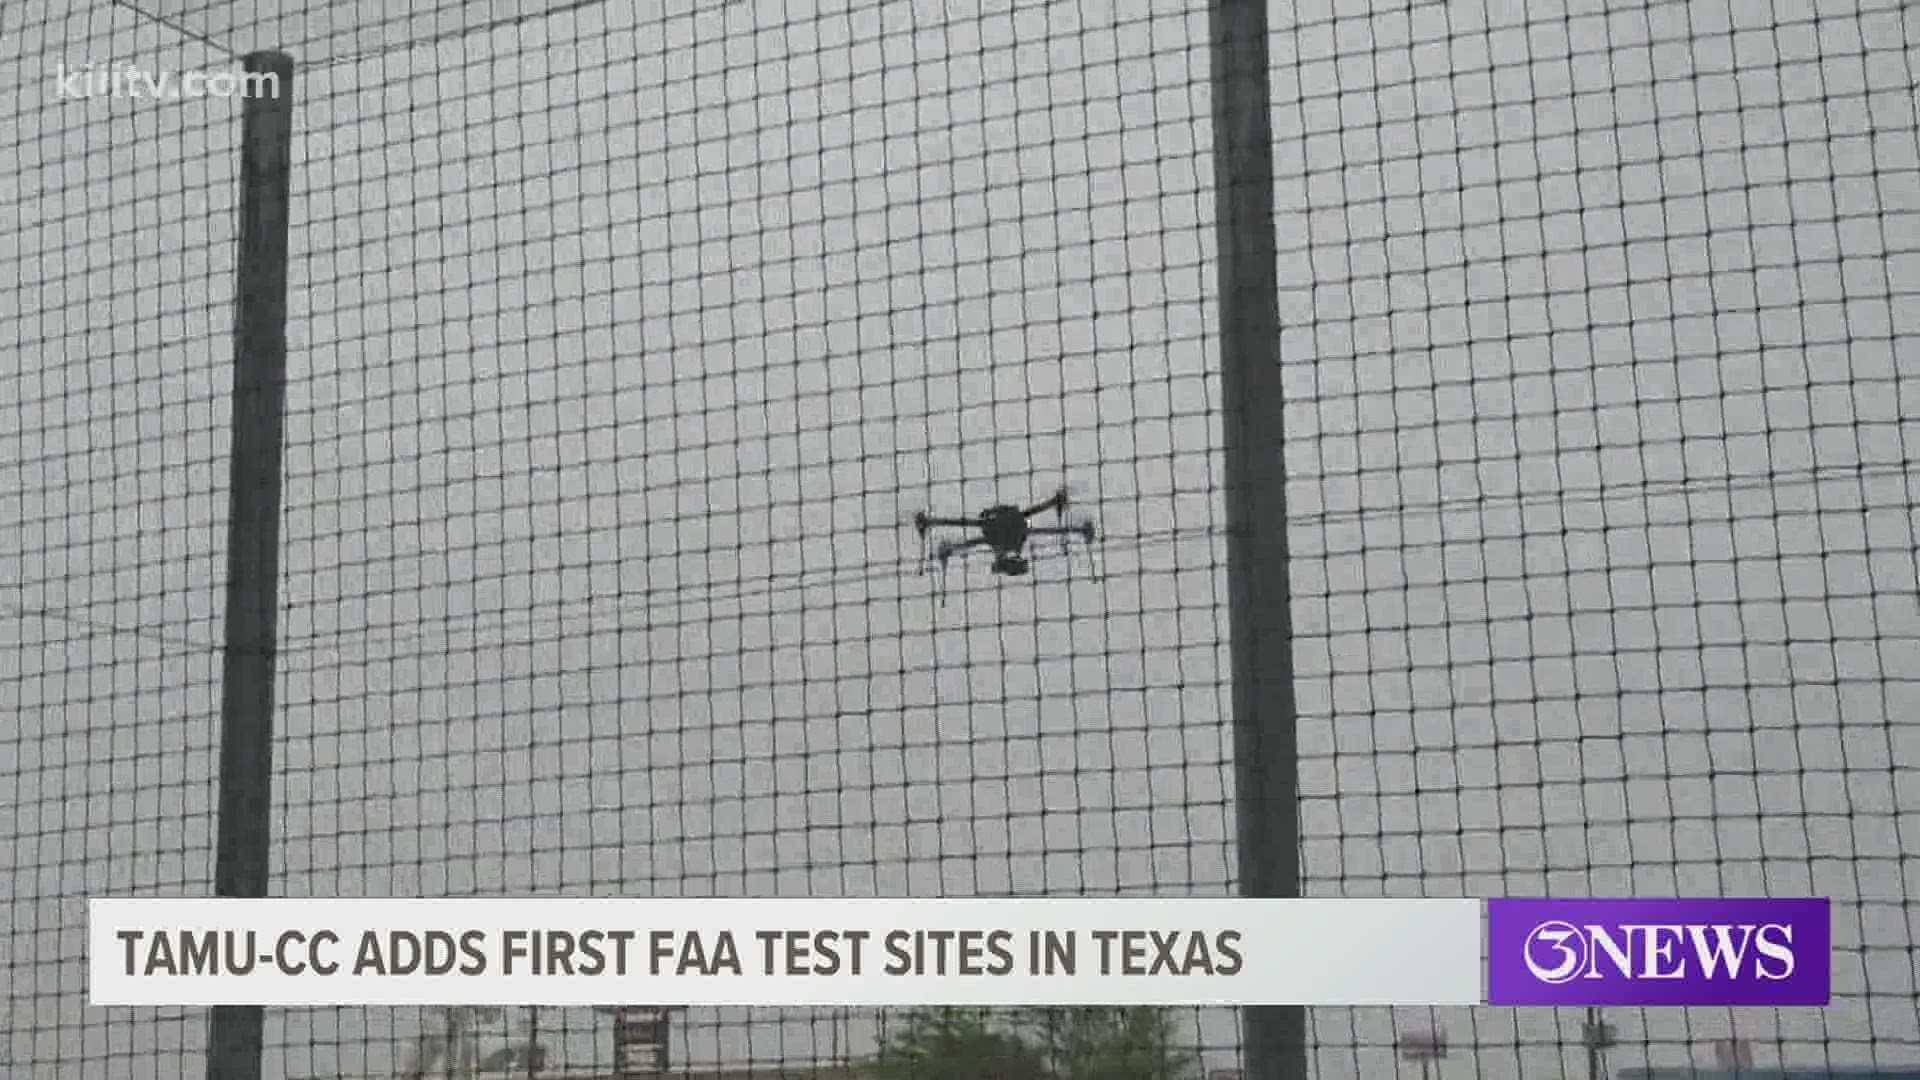 The university unveiled a new netting structure the size of a five story building in Flour Bluff where TAMU-CC houses their drone education program.